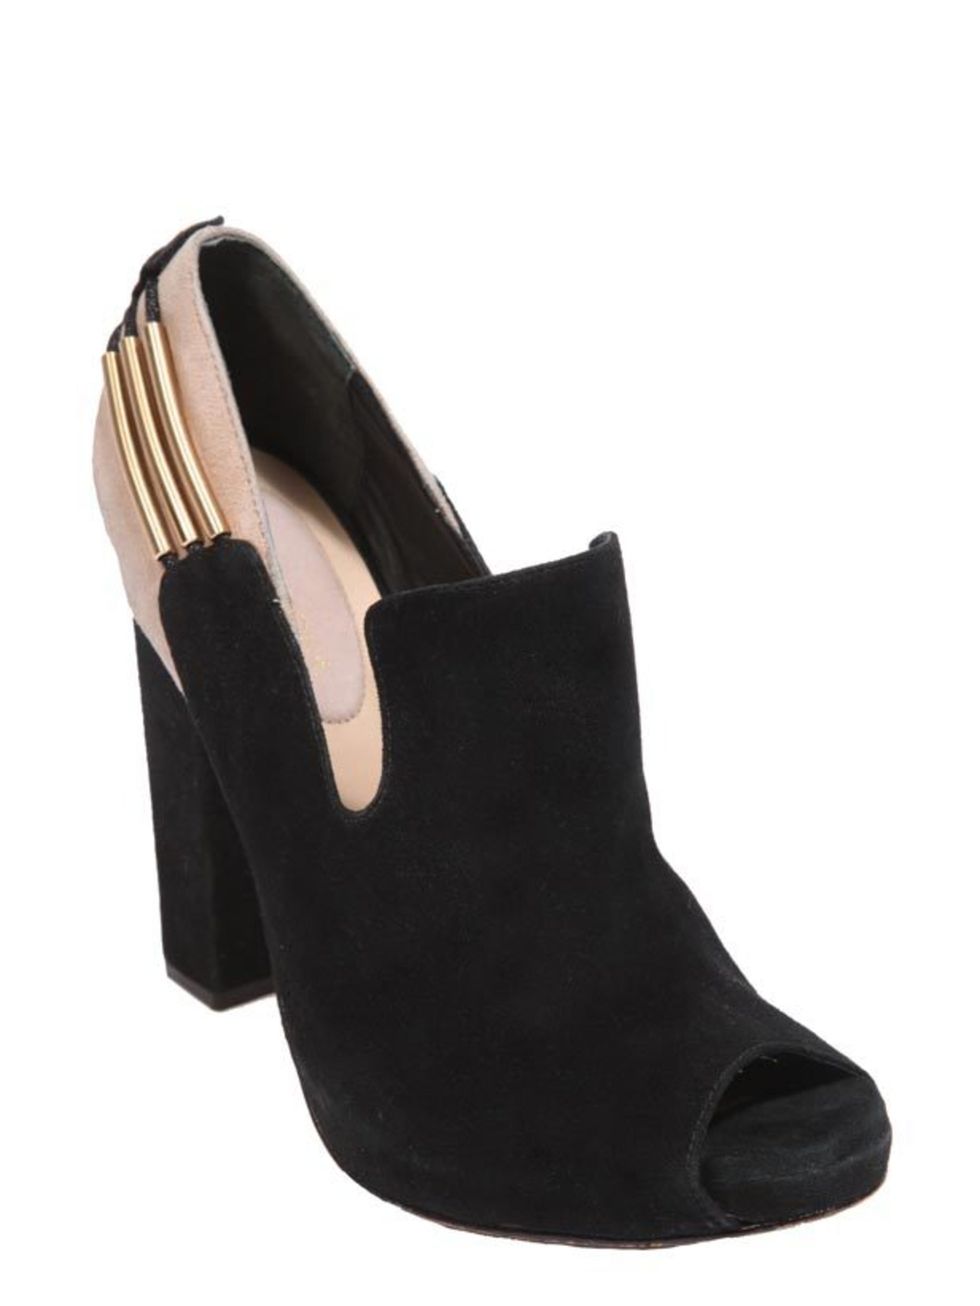 <p> </p><p>Kat Maconie has teamed up with grunge label Felder Felder for a one-off collaboration. The outcome? These killer heels with a luxe, rocknroll edge. Kat Maconie/Felder Felder peep-toe shoes, £225, at <a href="http://www.urbanoutfitters.co.uk/k